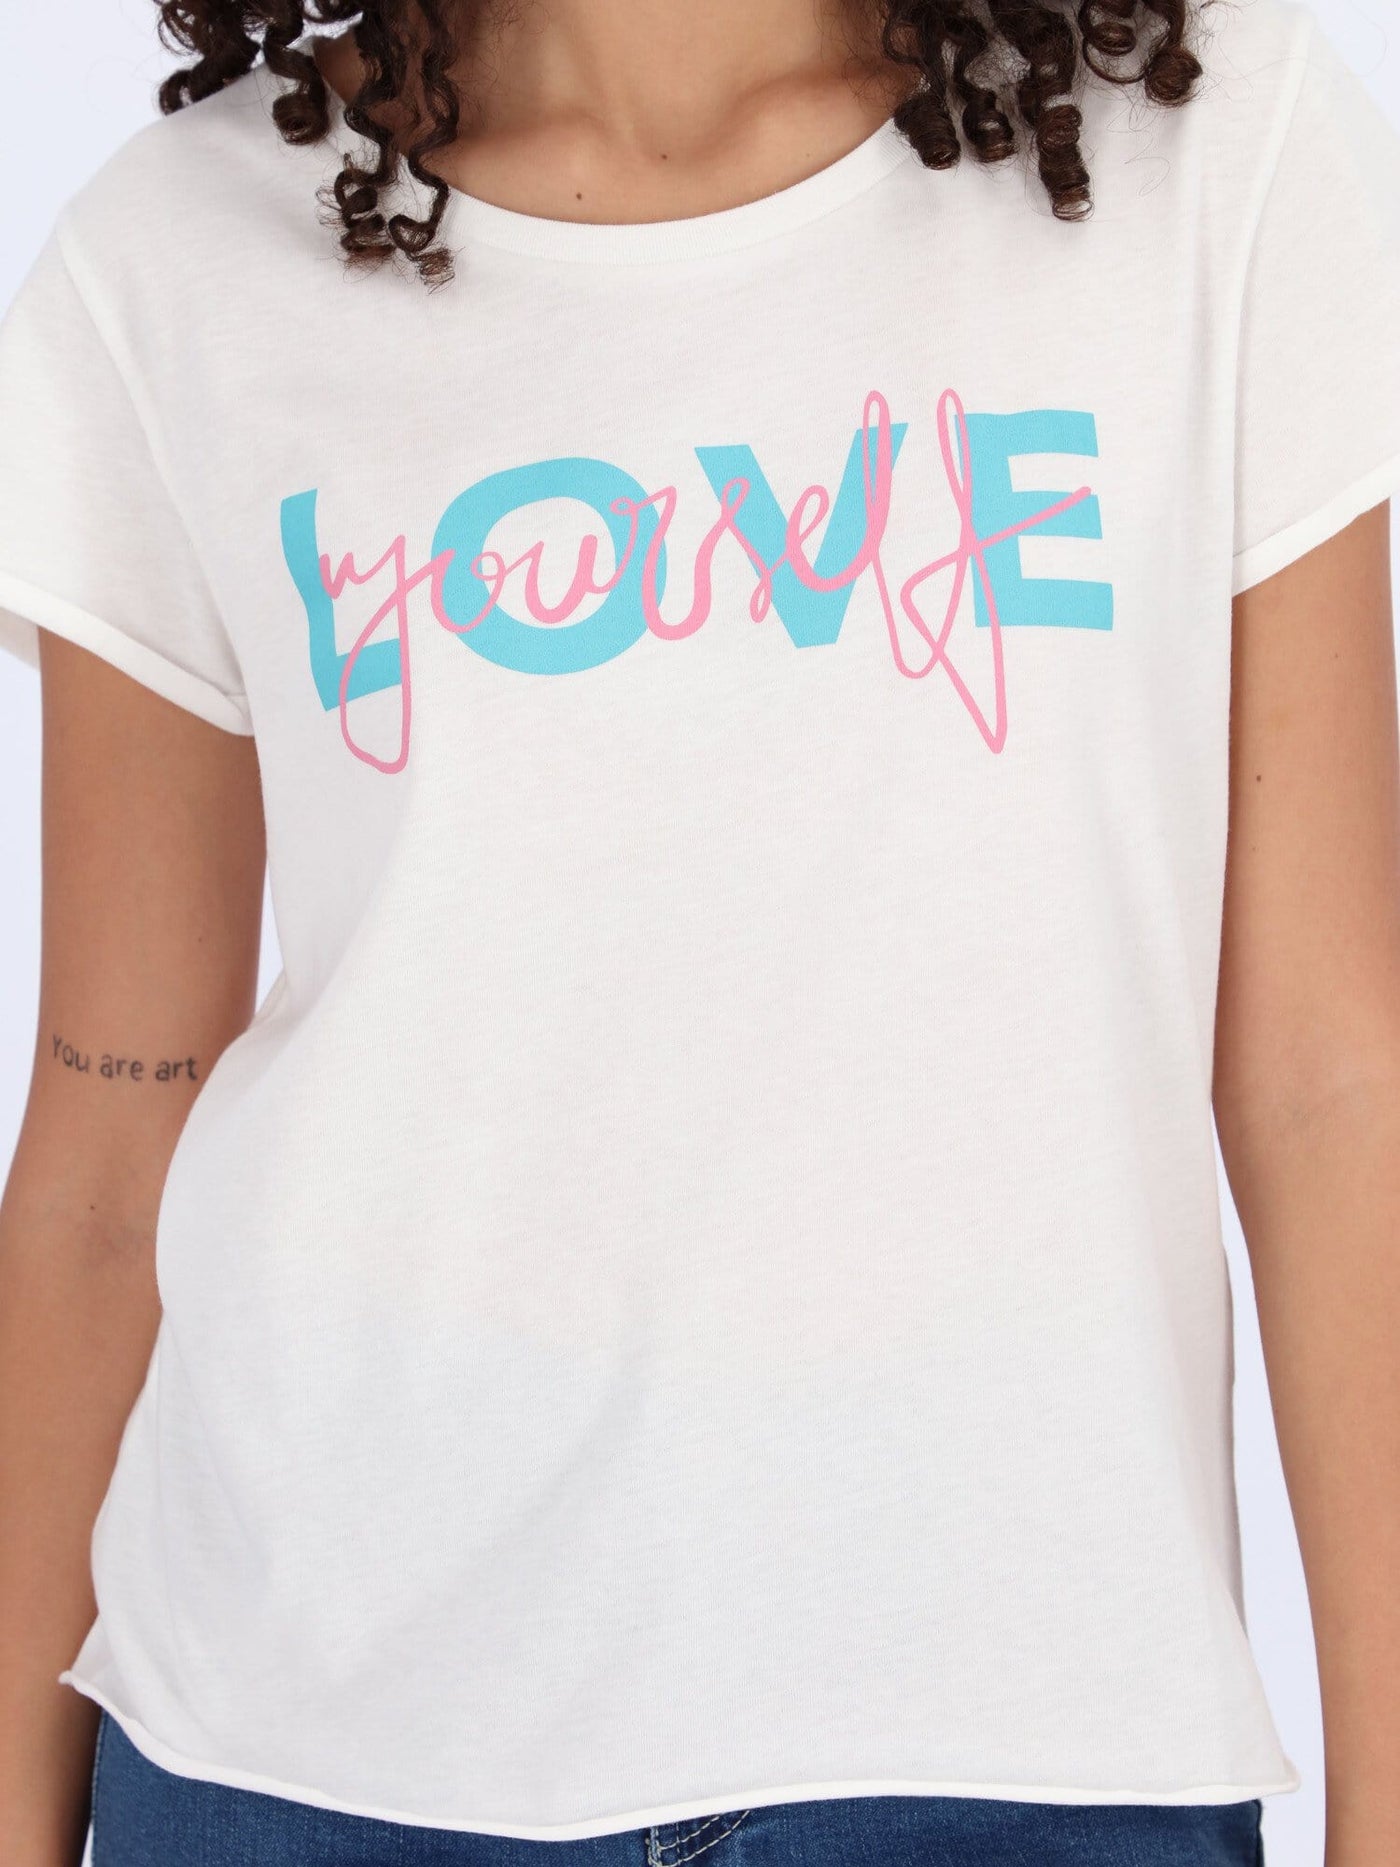 OR Tops & Blouses Love Yourself Front Text Print Short Sleeve Top